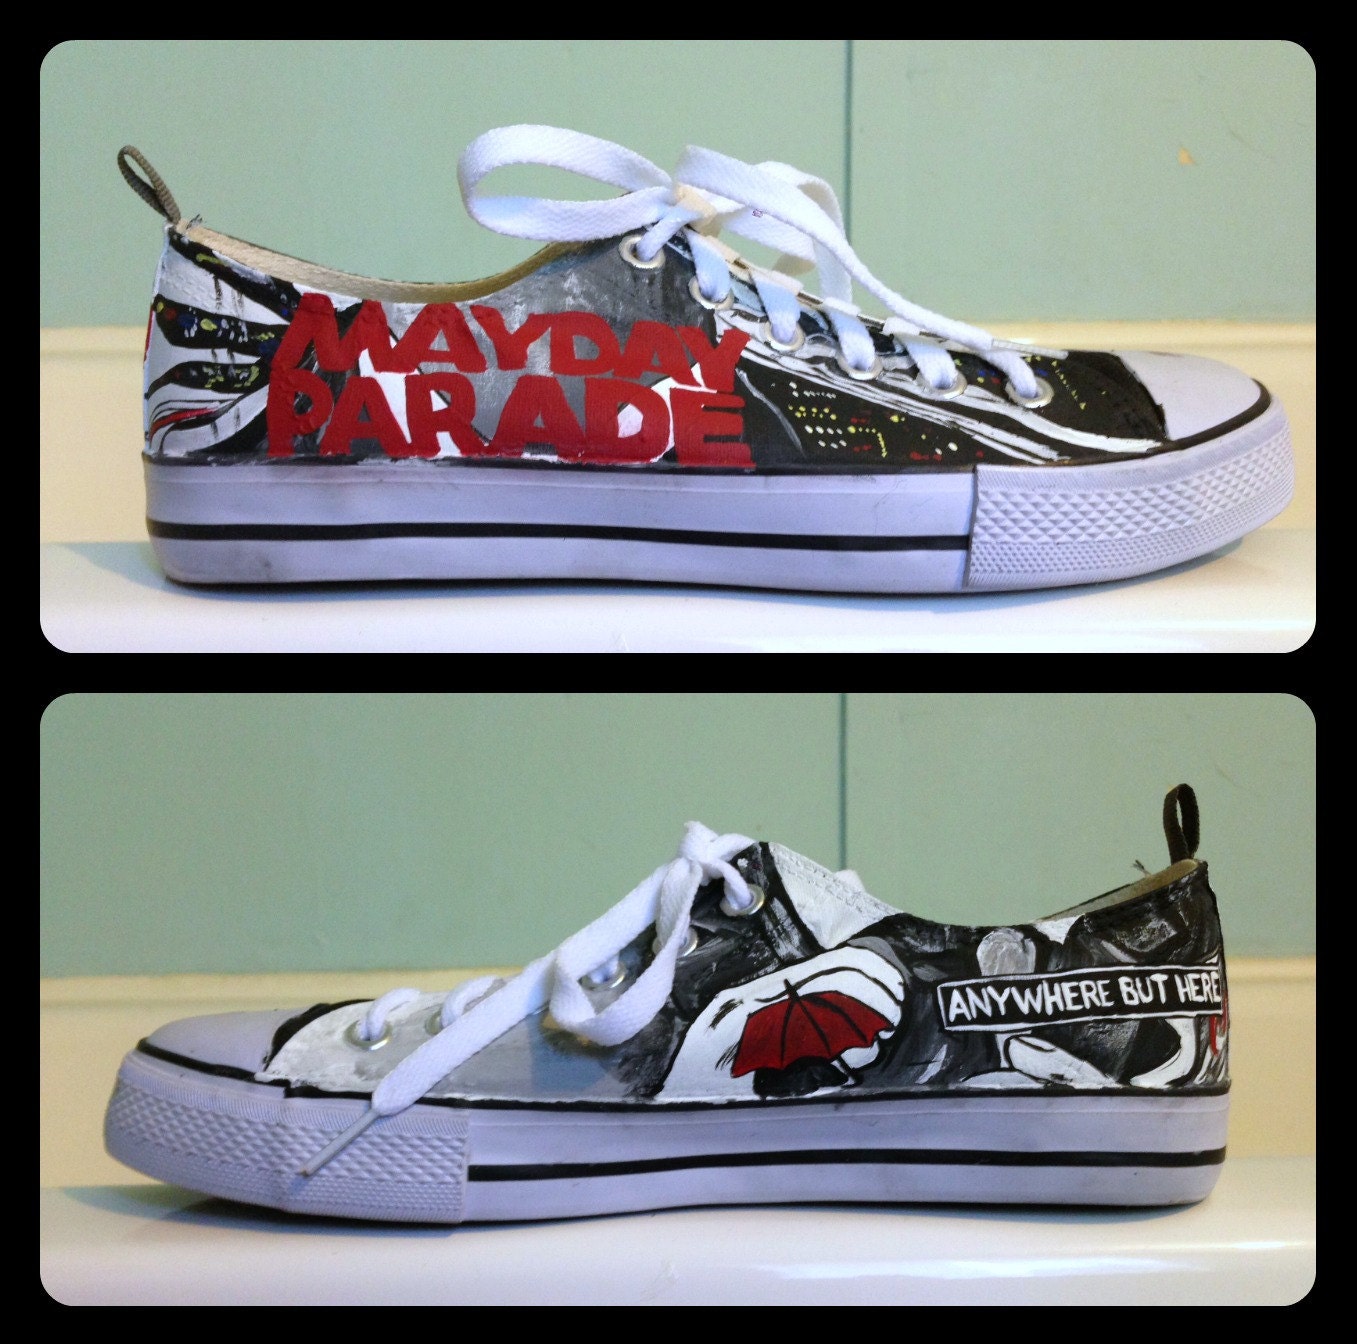 Women's Mayday Parade Shoes by RisingRedFox on Etsy